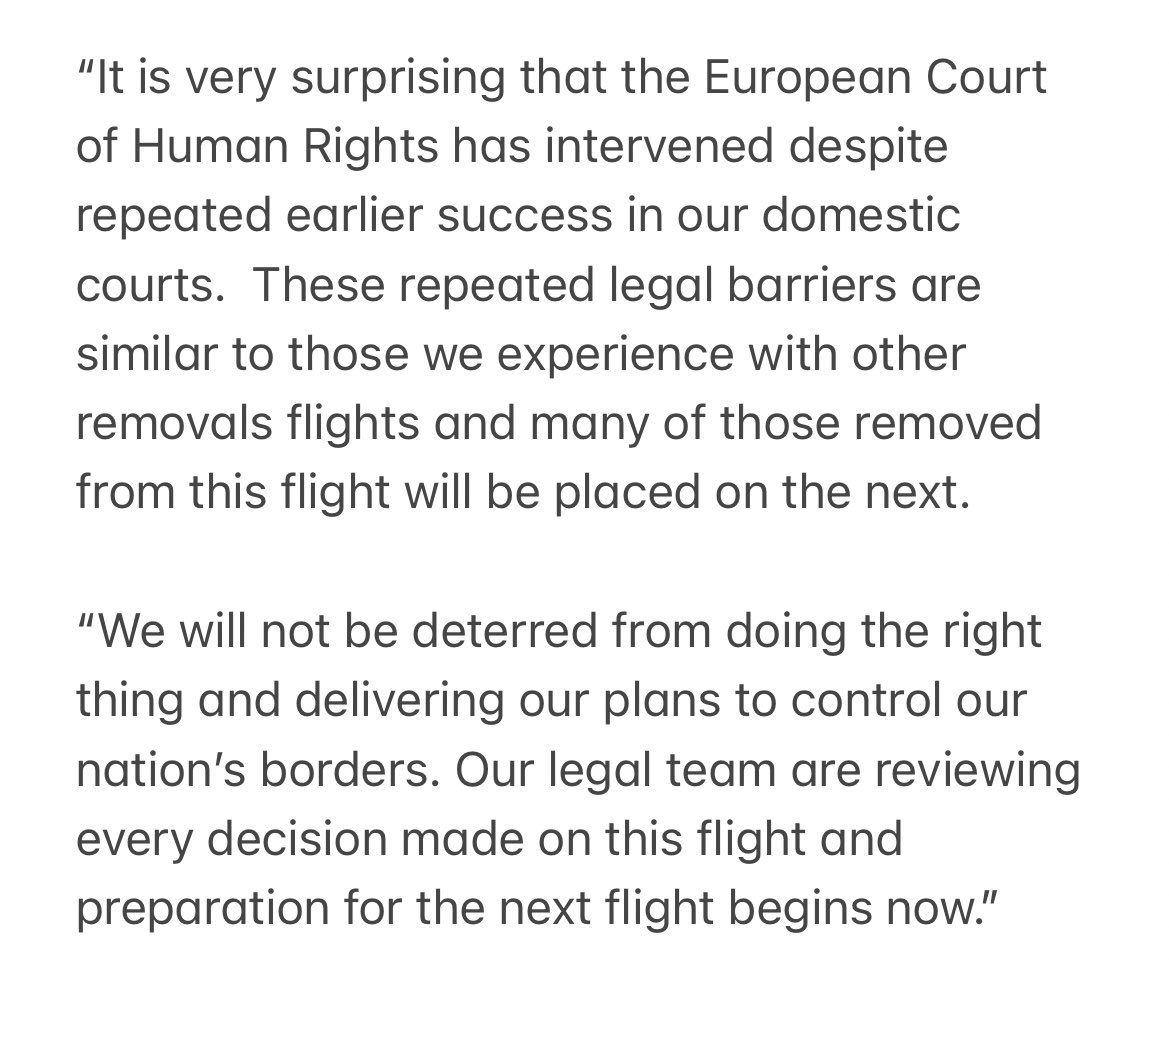 NEW: Just out from @pritipatel 
- disappointed legal challenge/last-min claims meant flight unable to depart
- V surprising European Court of Human Rights has intervened despite repeated earlier success in our domestic courts
- Won’t be deterred. Prep for next flight will begin